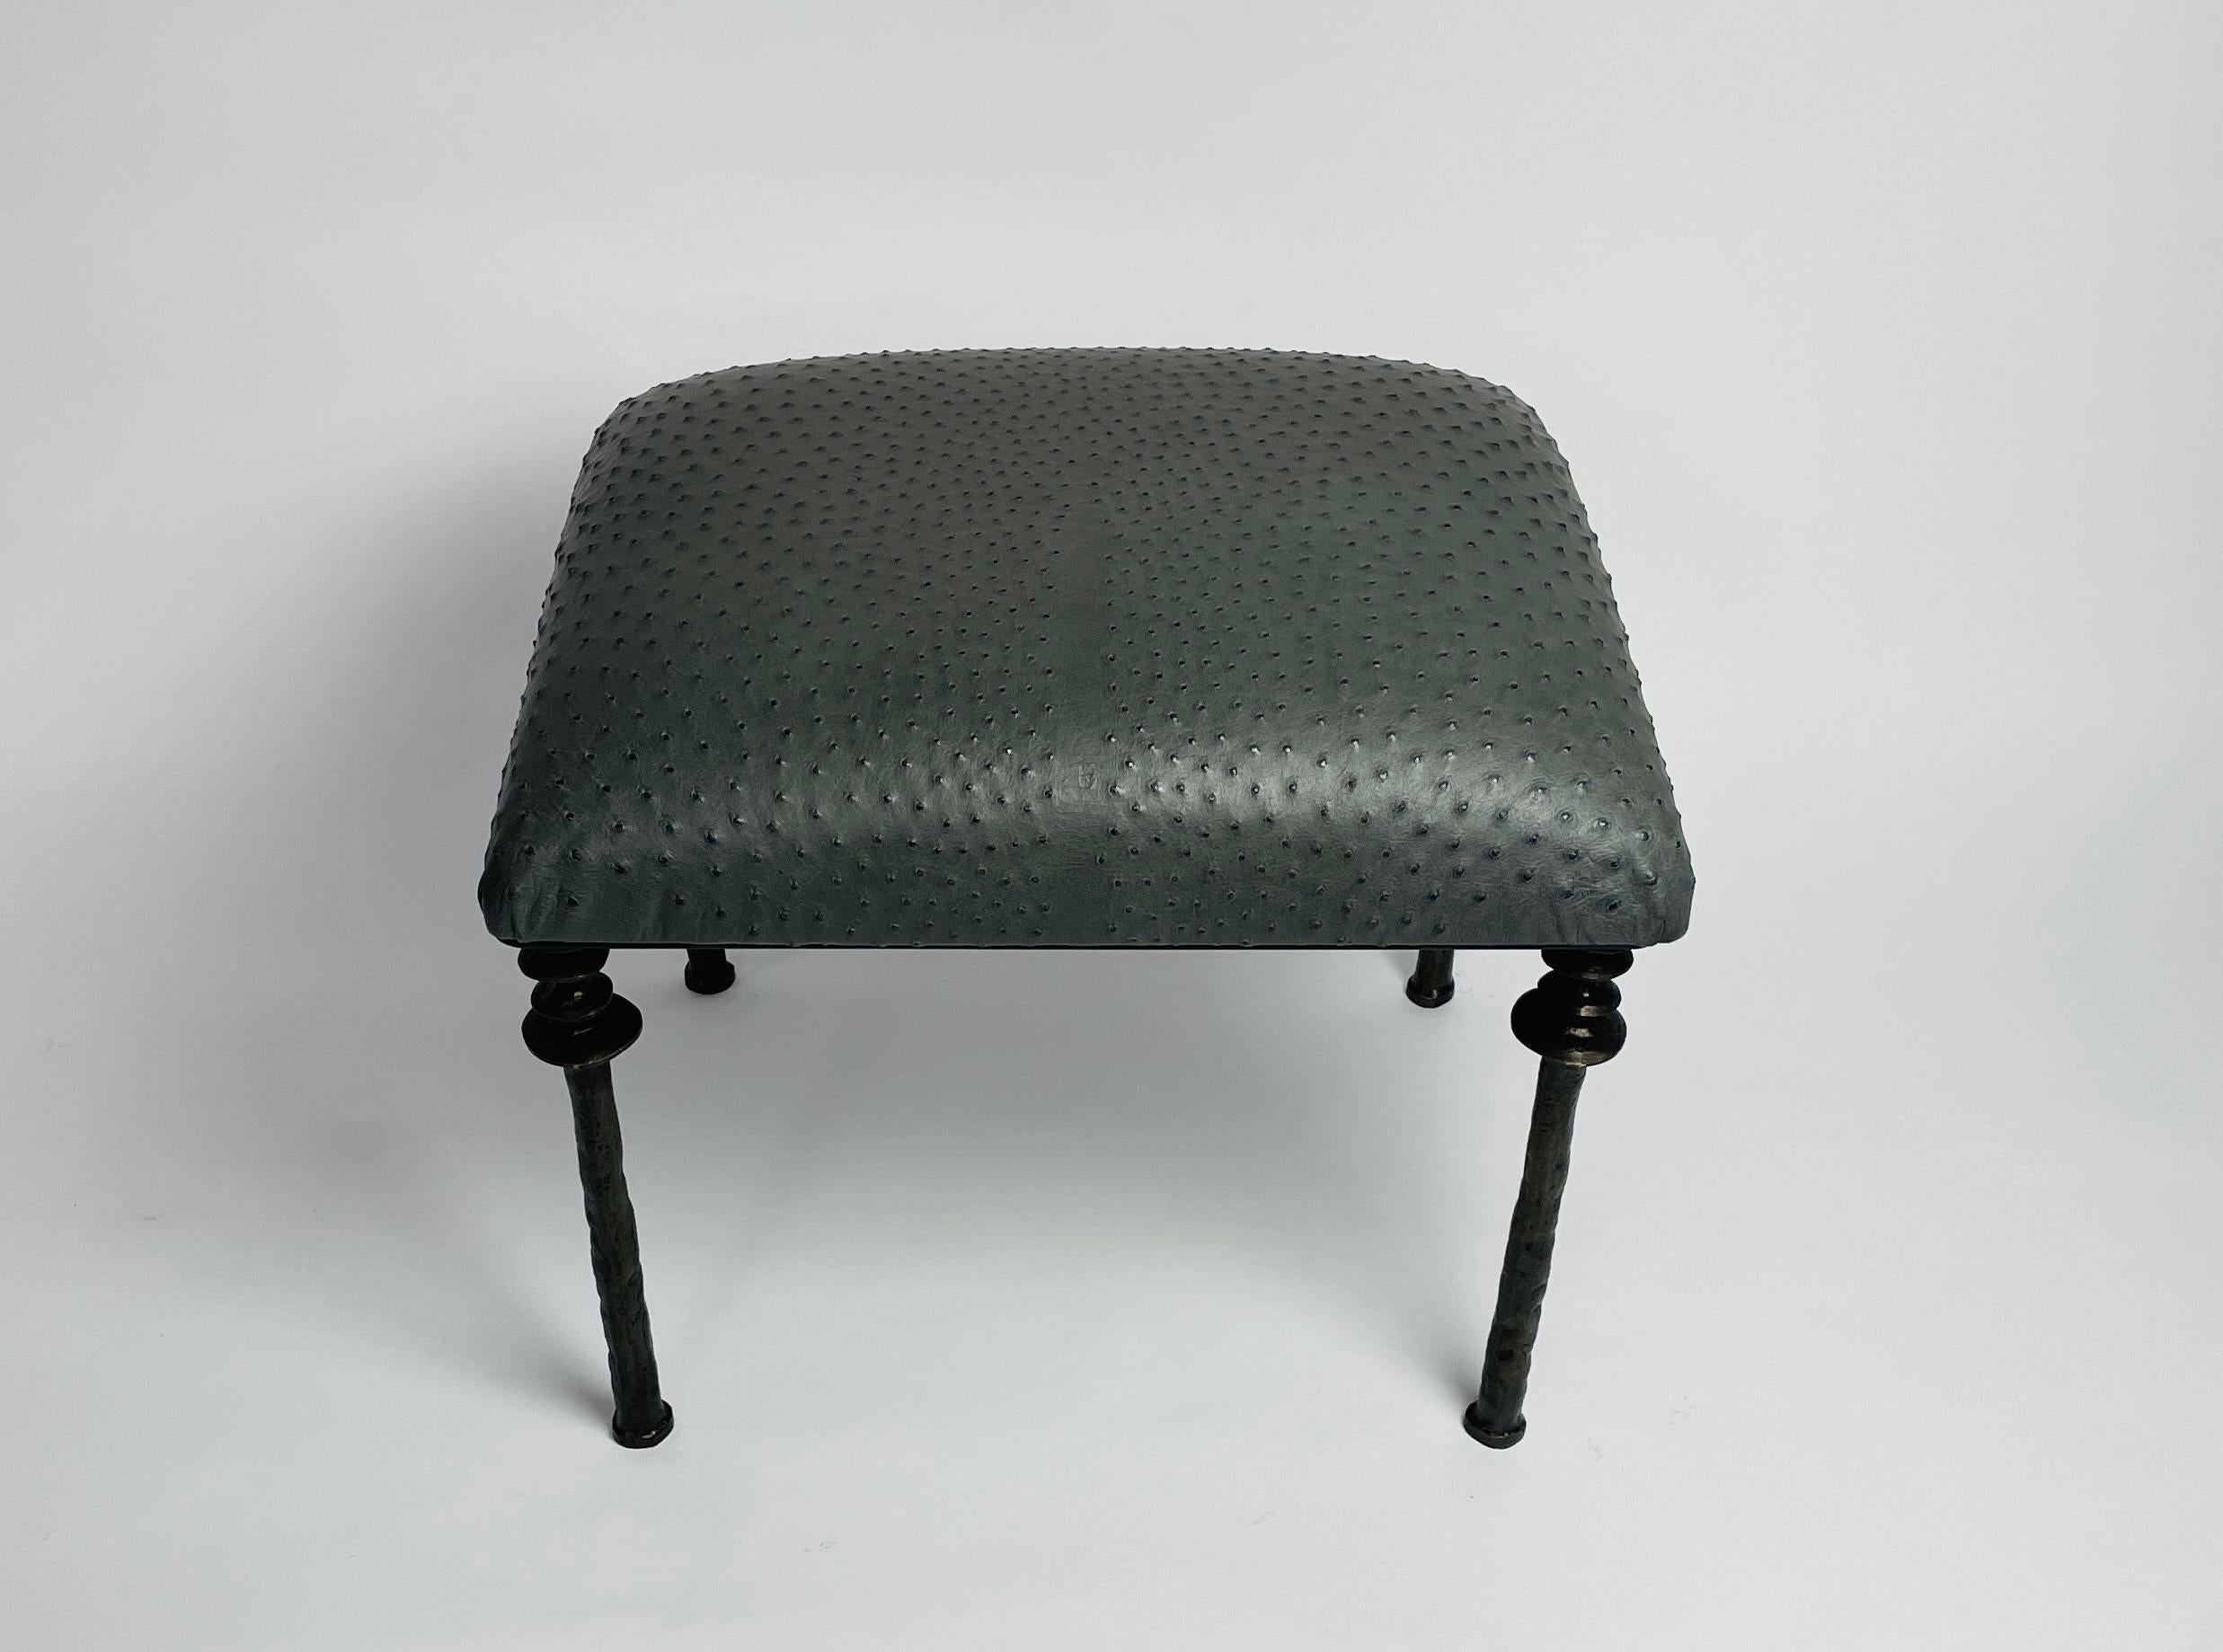 Organic Modern Pair of Sorgue Stools, by Bourgeois Boheme Atelier, Anthracite Ostrich Leather